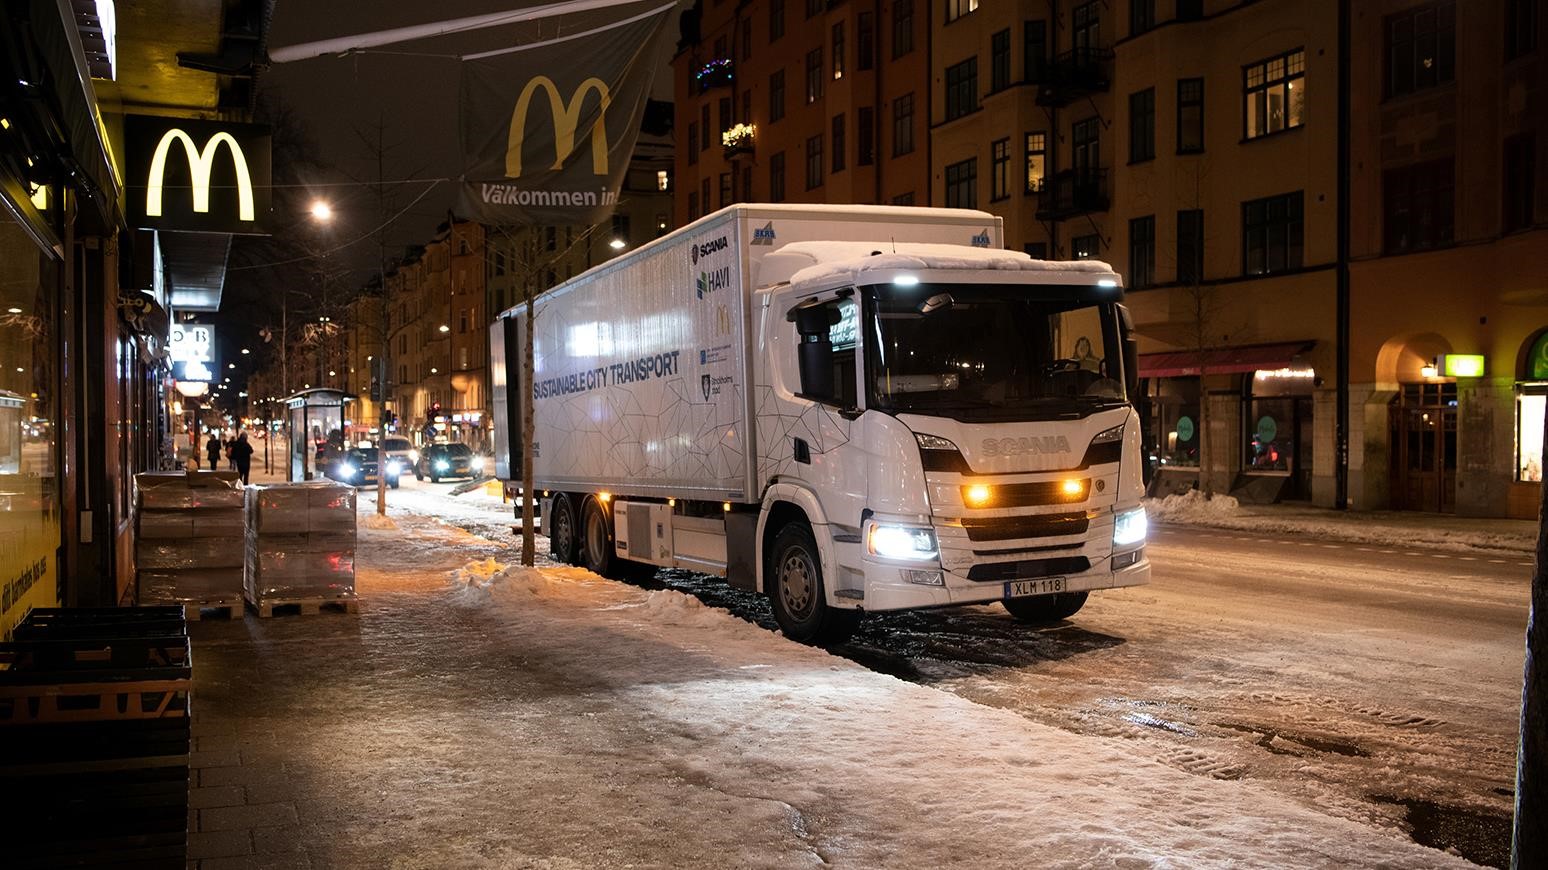 Swedish Logistics Company Hopes To Overcome Nighttime Noise Restrictions With Hybrid Scania Truck